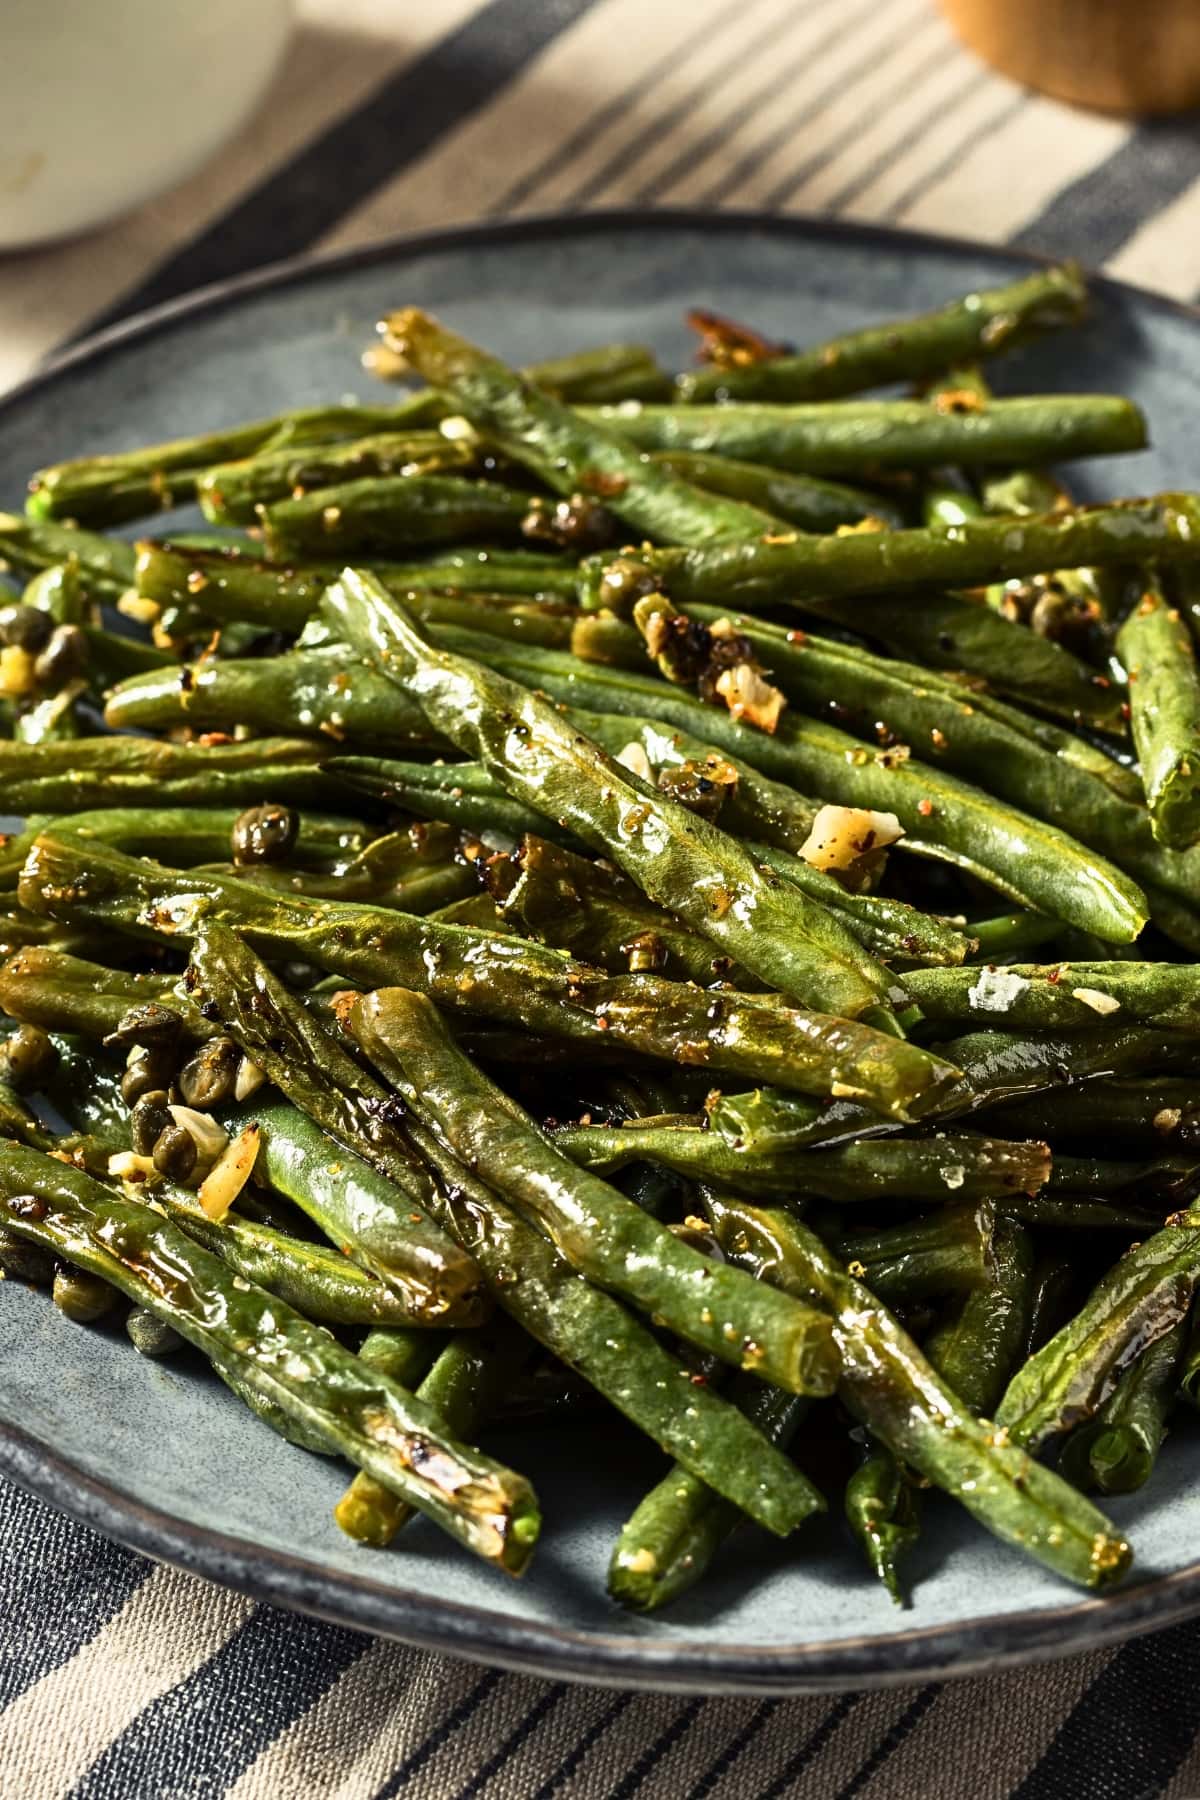 A serving of roasted green beans in garlic on a plate.